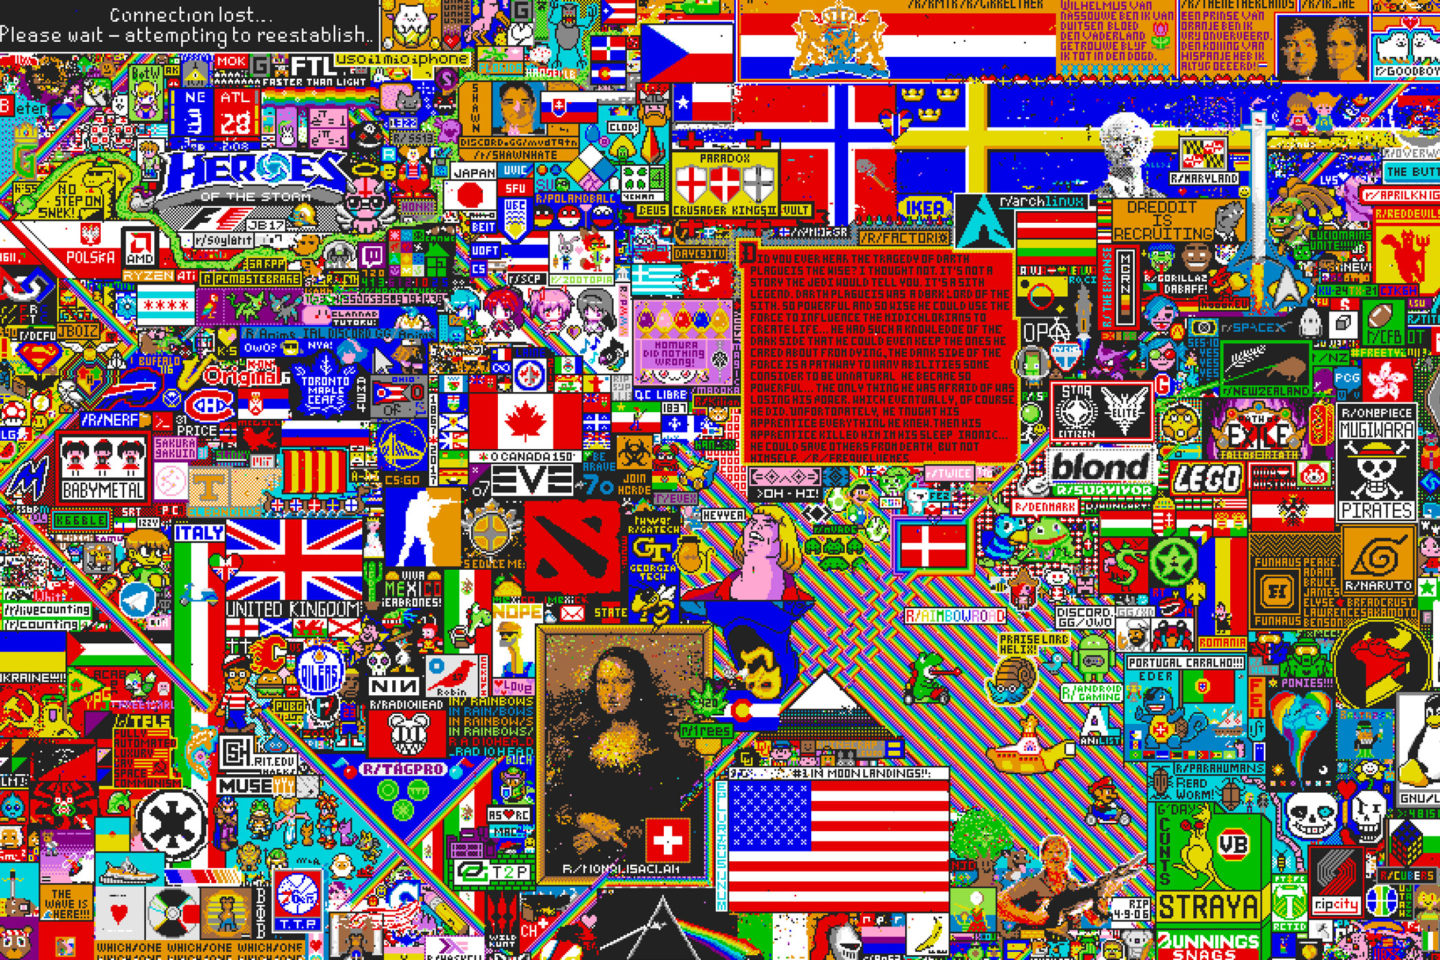 For April Fool's Day in 2017, Reddit gave their users the opportunity to paint on an open web canvas, one pixel at a time.